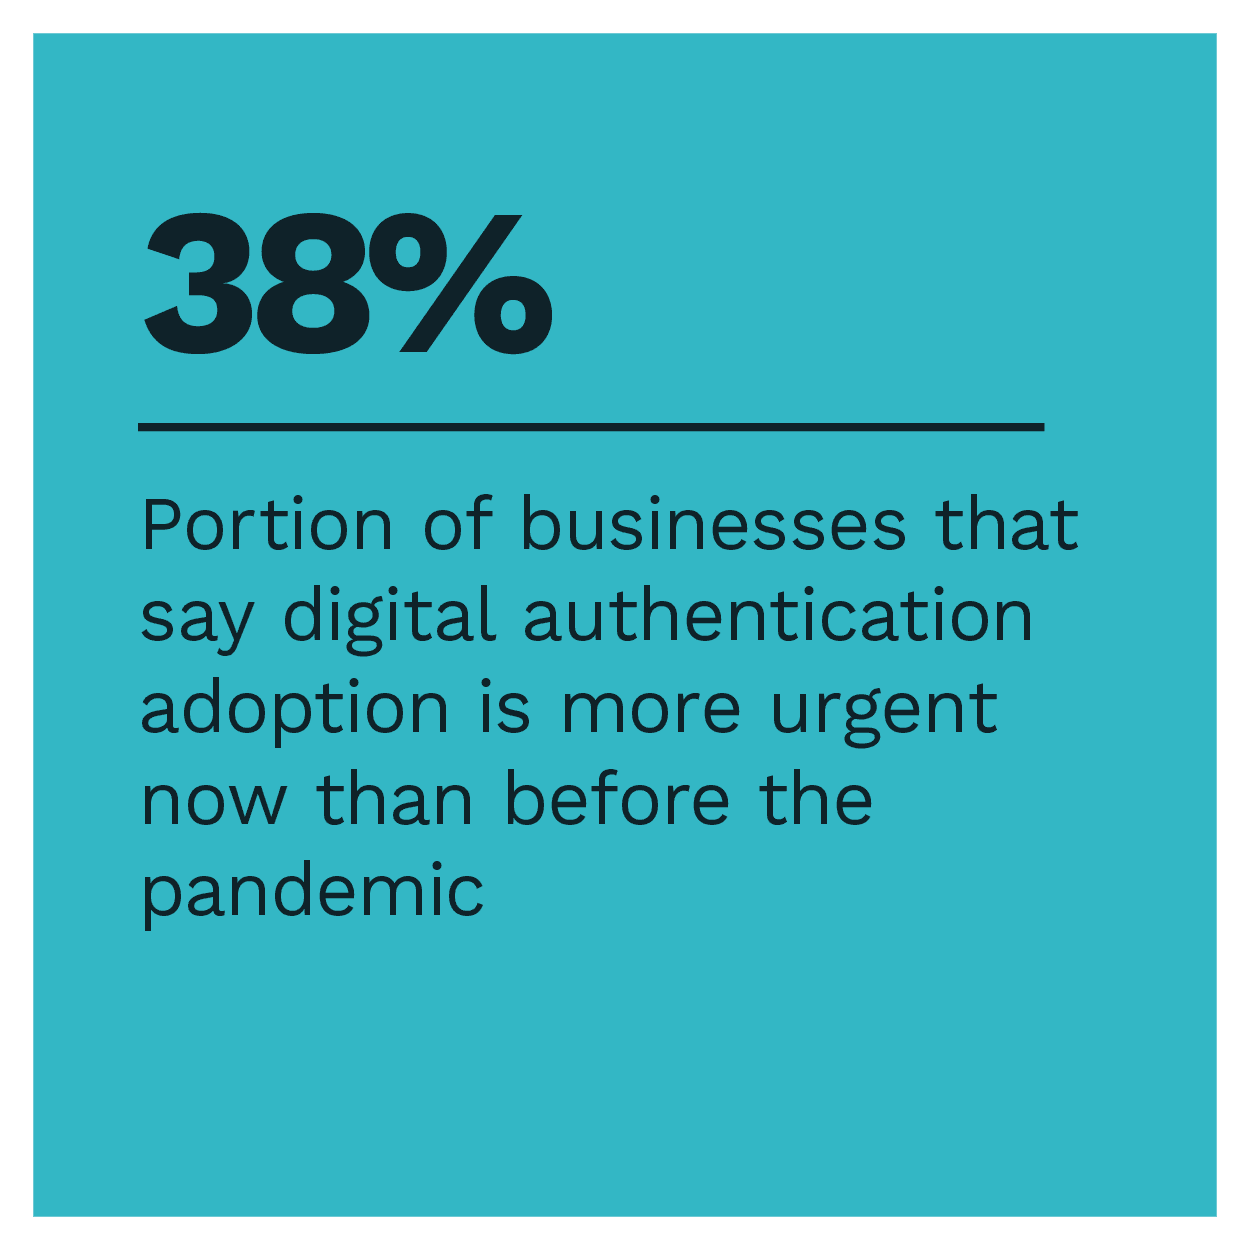 Businesses say digital authentication adoption is more urgent now than before the pandemic